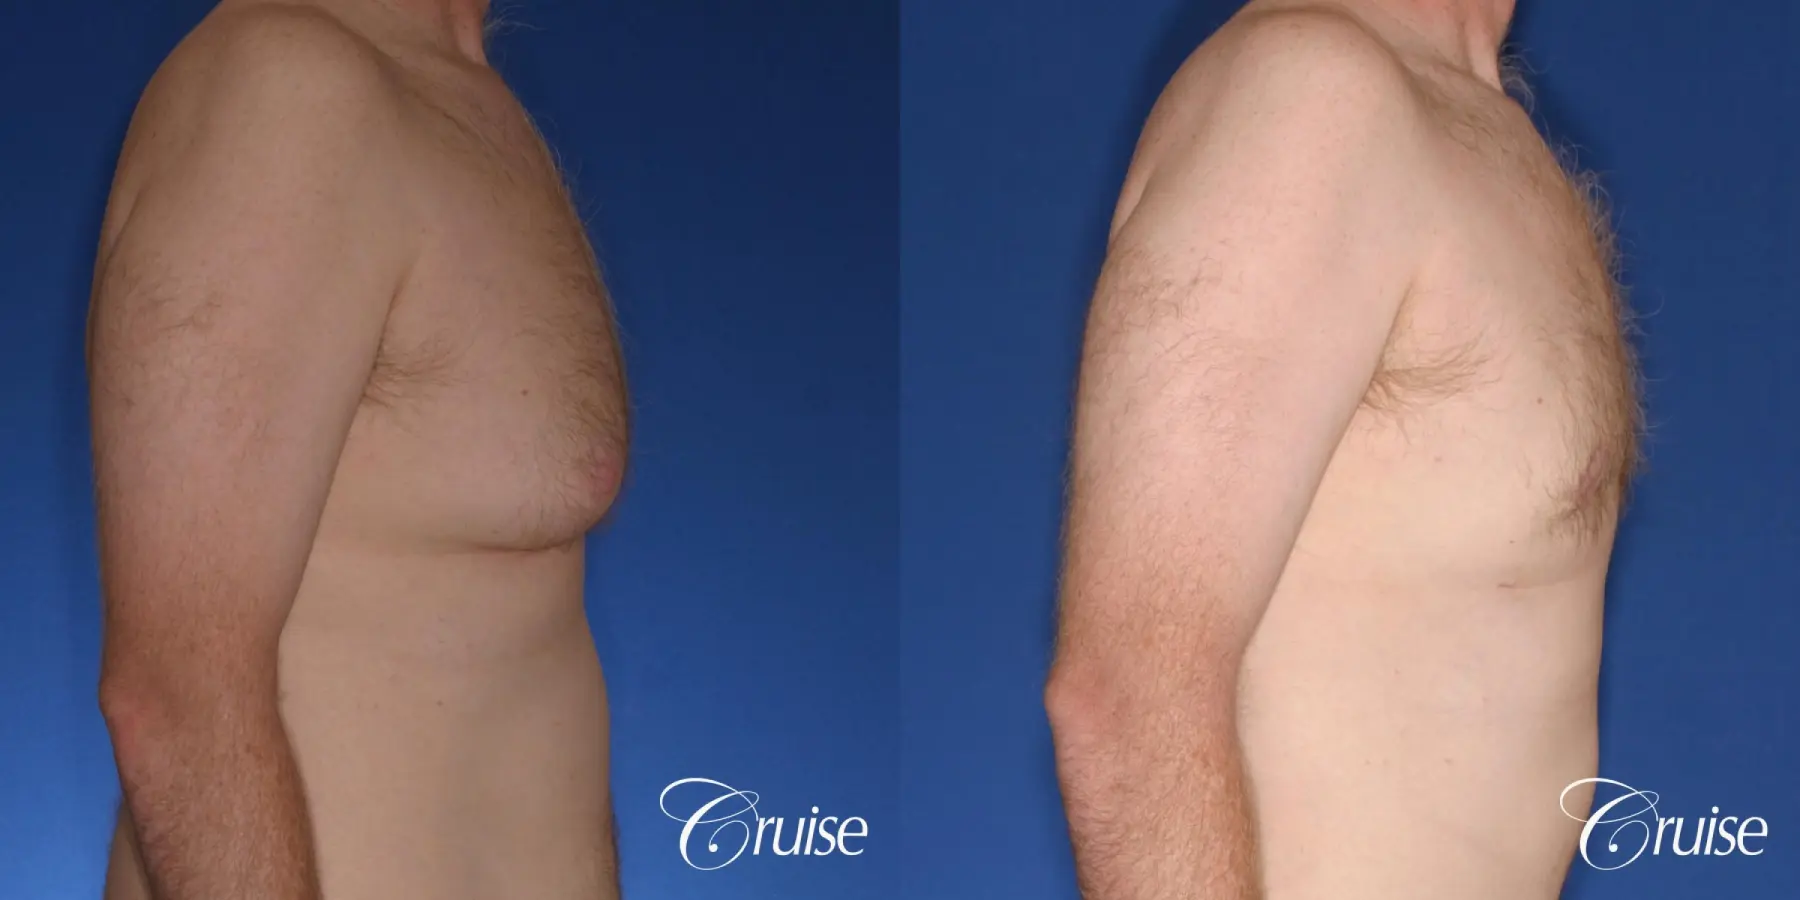 best donut lift with gynecomastia surgery - Before and After 3